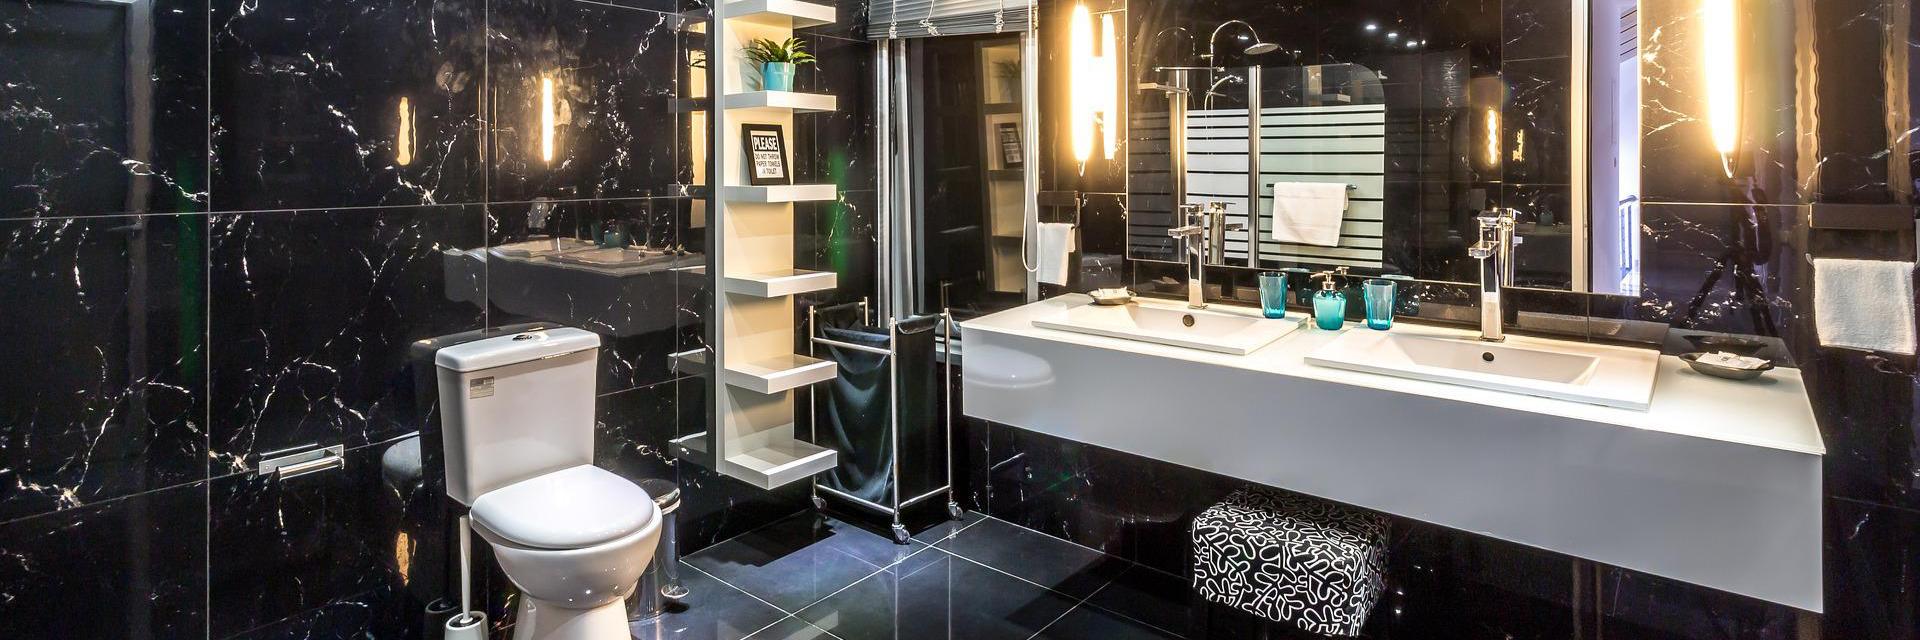 Complete Bathroom Updates Shower Room and Cloakroom Installations